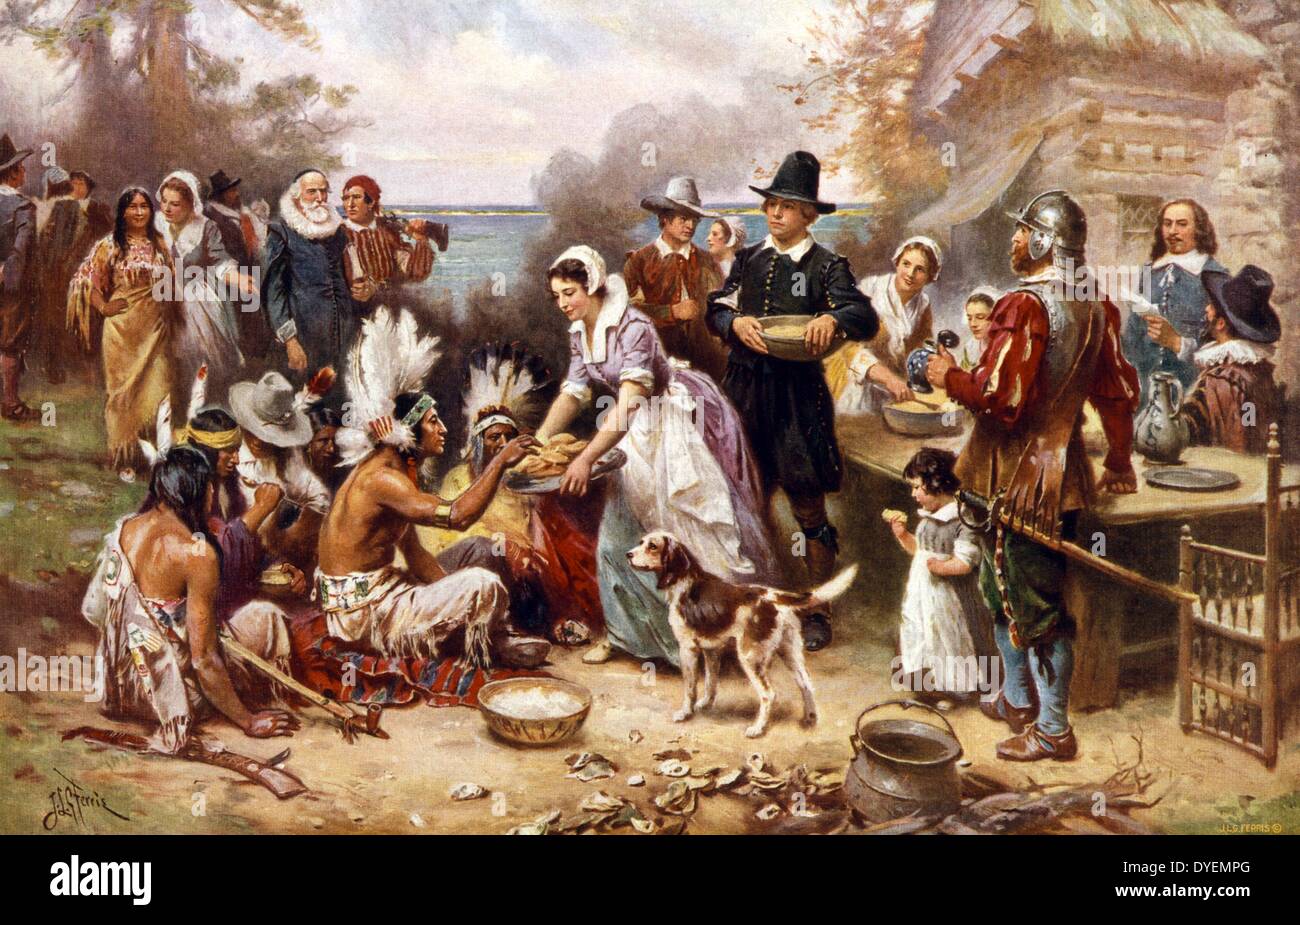 The first Thanksgiving 1621 by Jean Leon Gerome Ferris, 1863-1930, artist. Published by the Foundation Press, Inc., c1932. photomechanical print halftone, colour. Pilgrims and Natives gather to share meal. Stock Photo